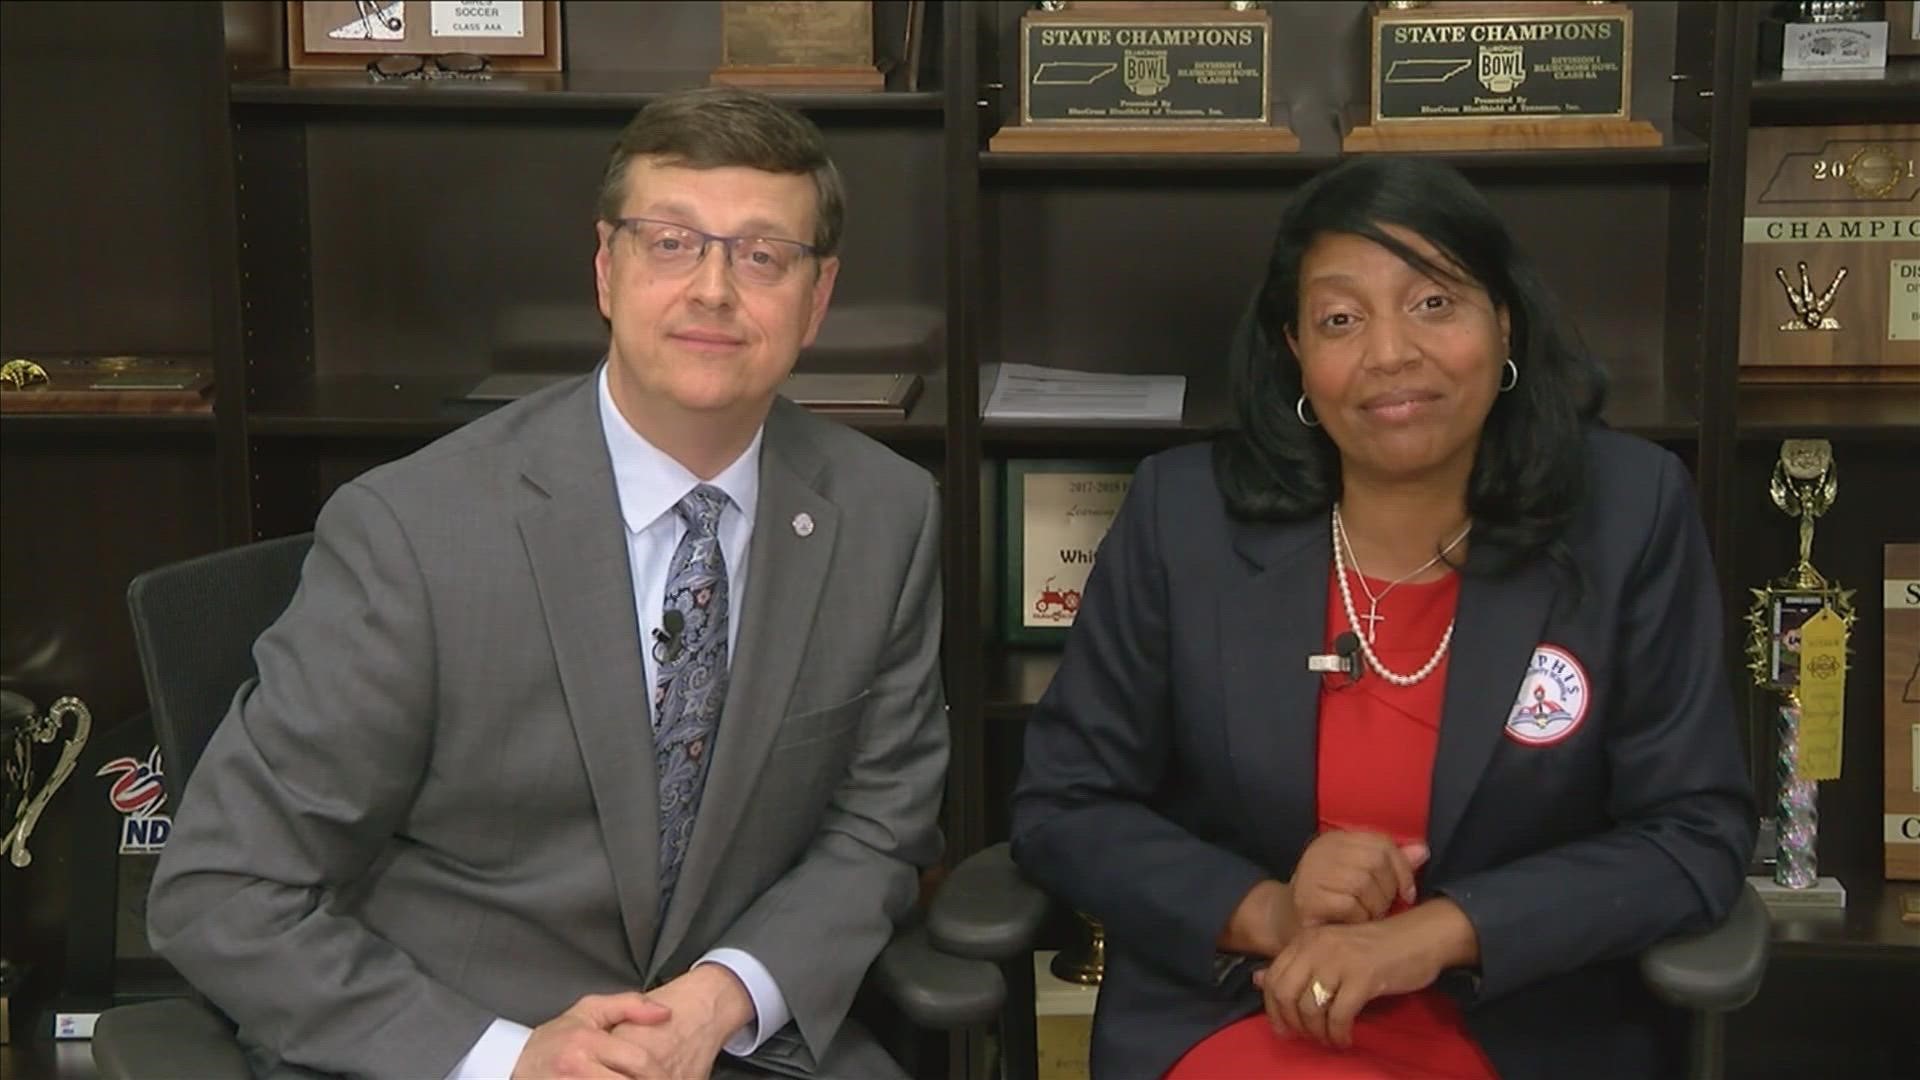 ABC24’s Richard Ransom went one-on-one with the two Deputy Superintendents - Dr. Angela Whitelaw and Dr. John Barker – who are sharing superintendent duties for now.